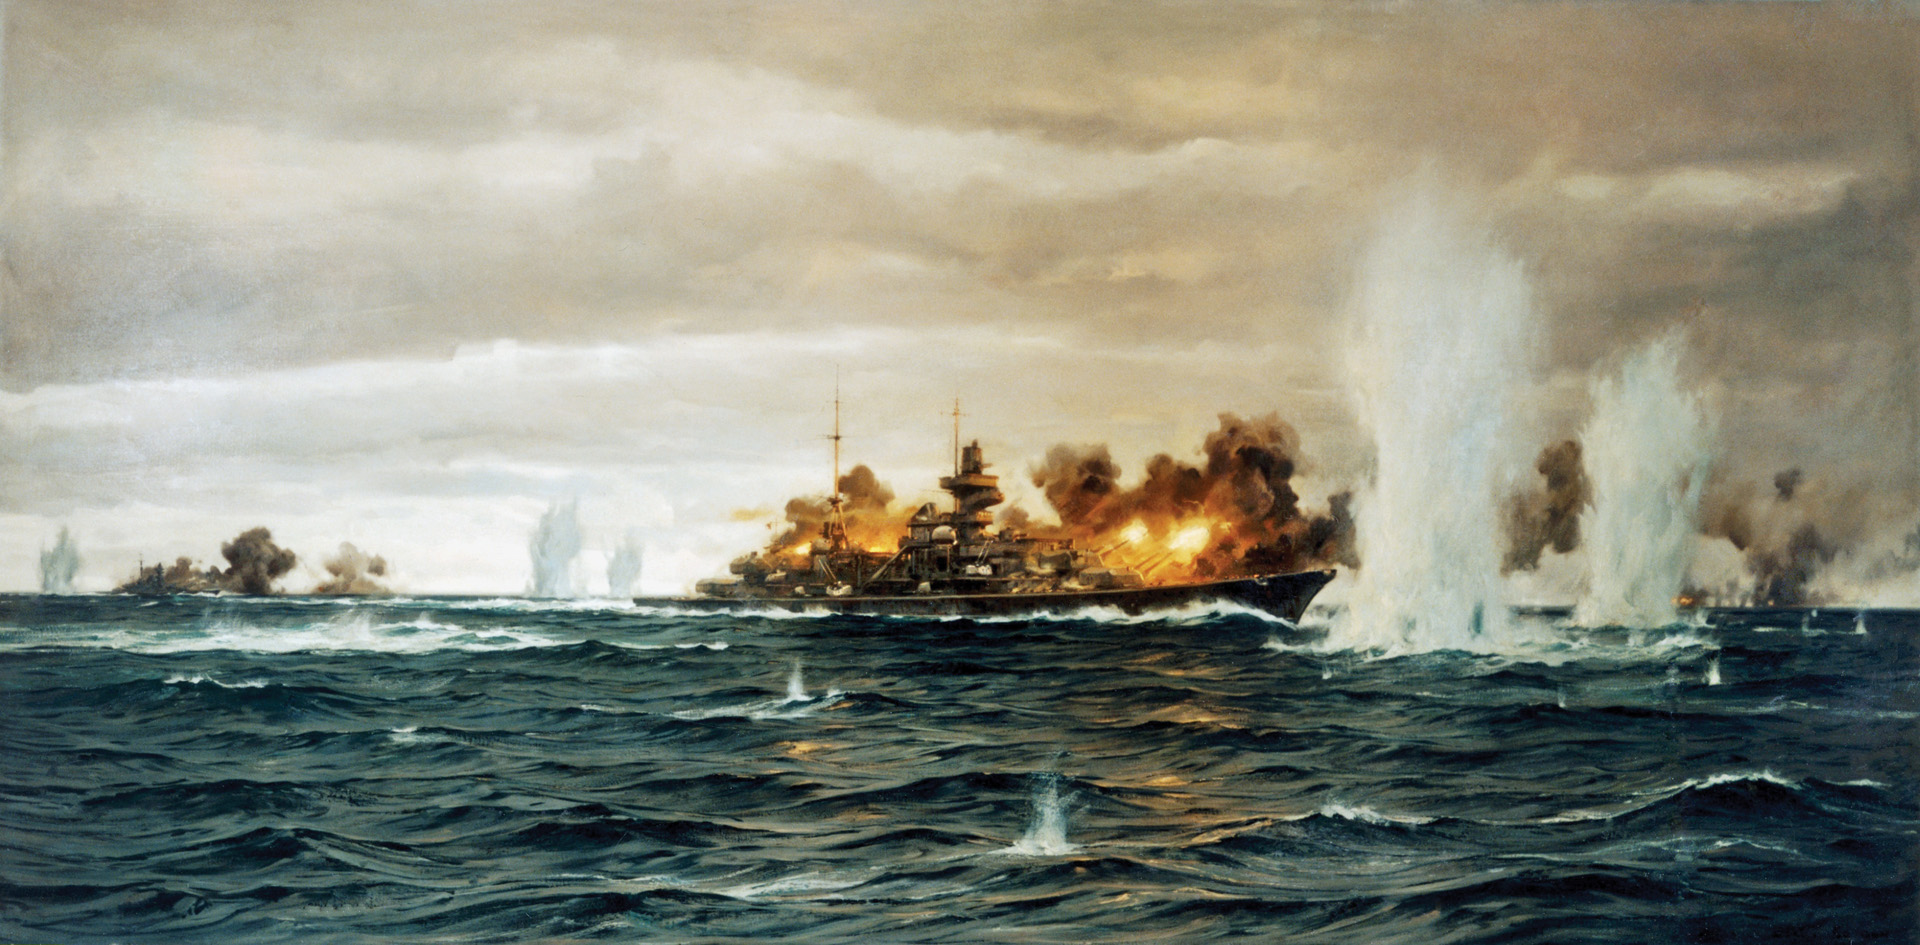 Bismarck and Prinz Eugen engage HMS Hood and HMS Prince of Wales during the Battle of the Denmark Strait on May 23, 1941. The Bismarck’s fifth salvo broke apart the Hood, sending her to the bottom of the ocean.